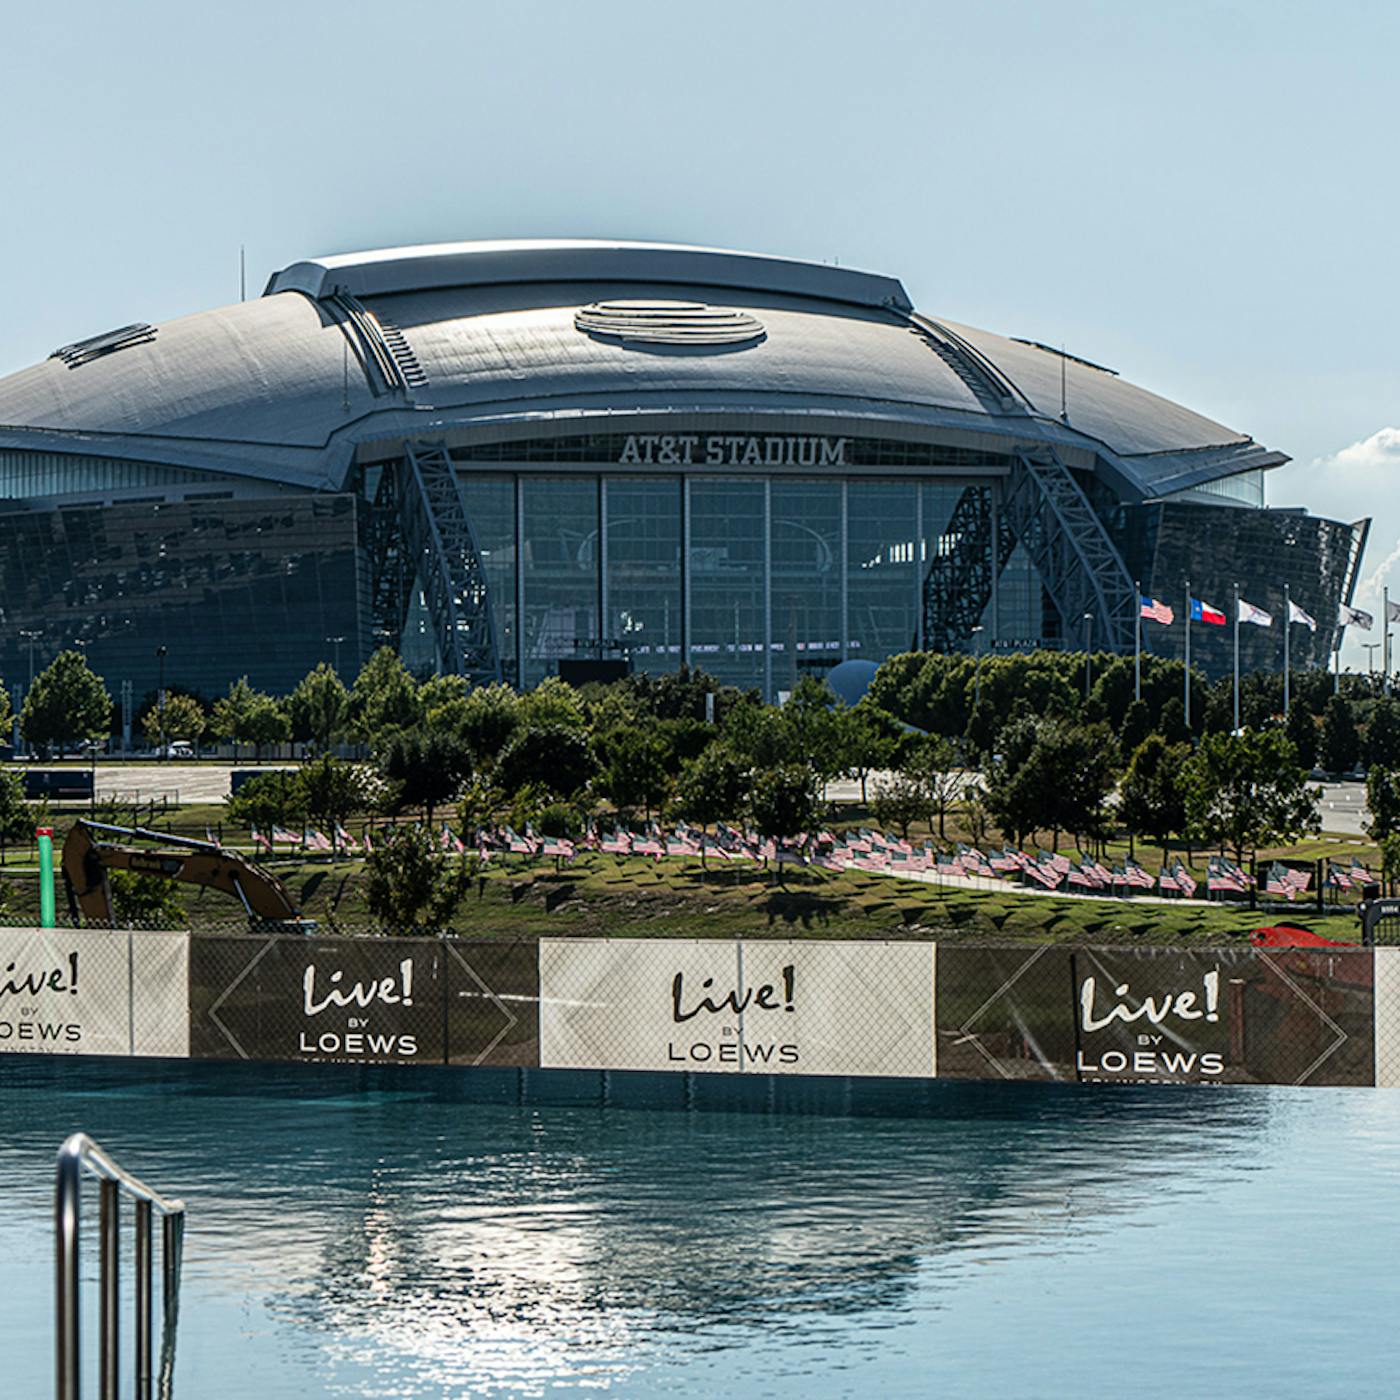 Step Inside: AT&T Stadium - Home of the Dallas Cowboys